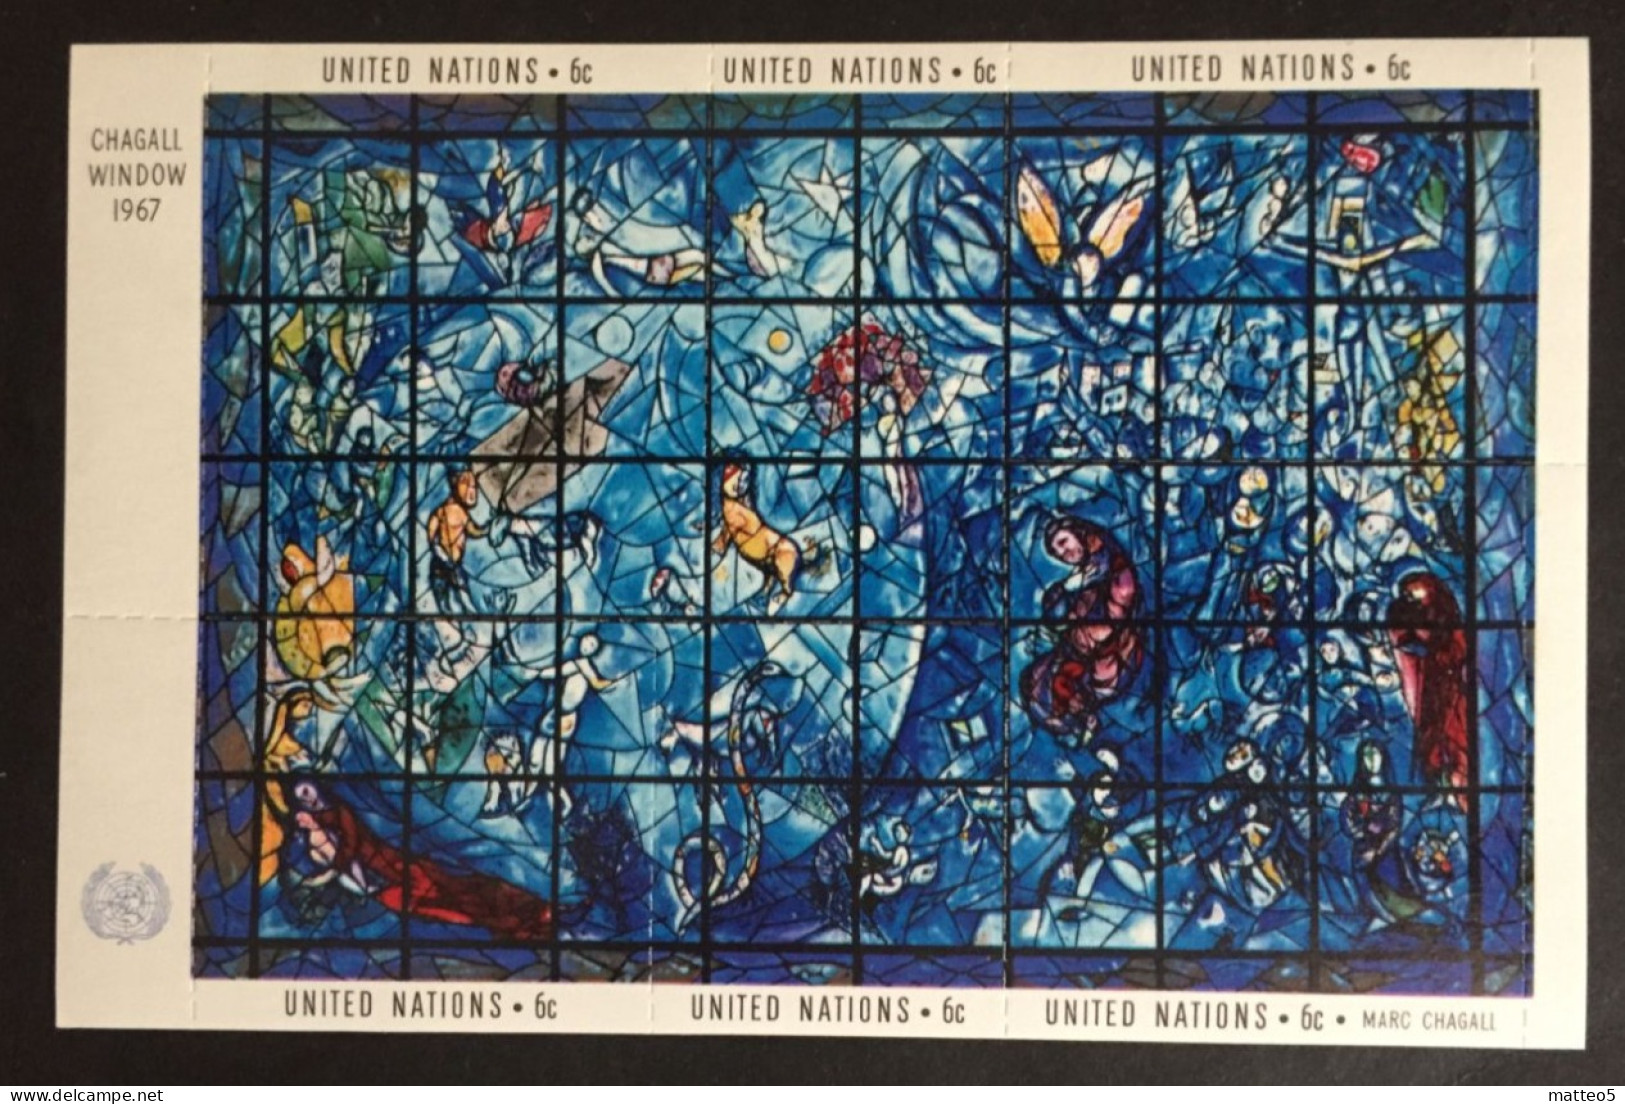 1967 - United Nations UNO UN - Marc Chagall - Window - Stained Glass Painting Art - Sheet - Unused - Unused Stamps